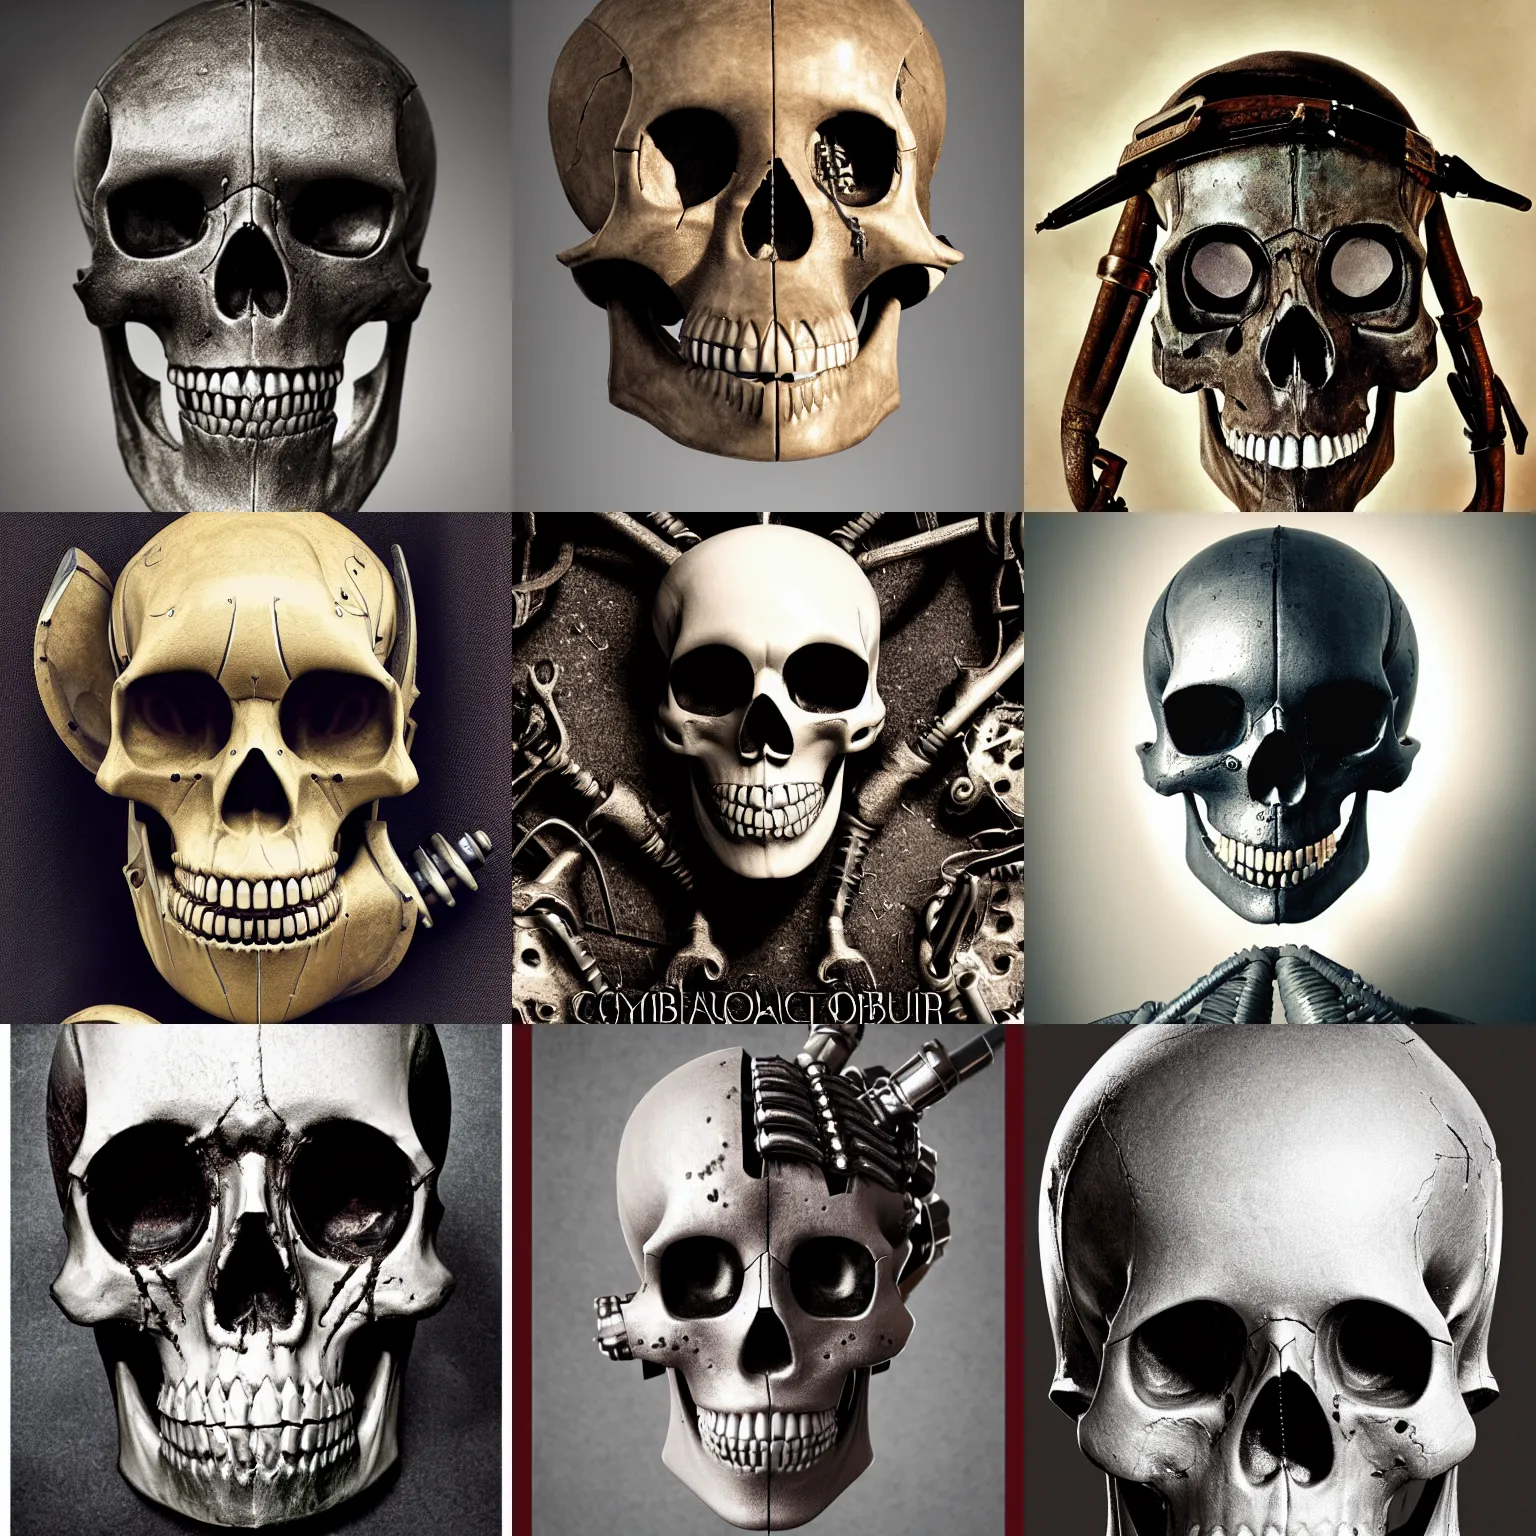 Prompt: photo of a cyborg pirate skull, front view, award-winning magazine photograph